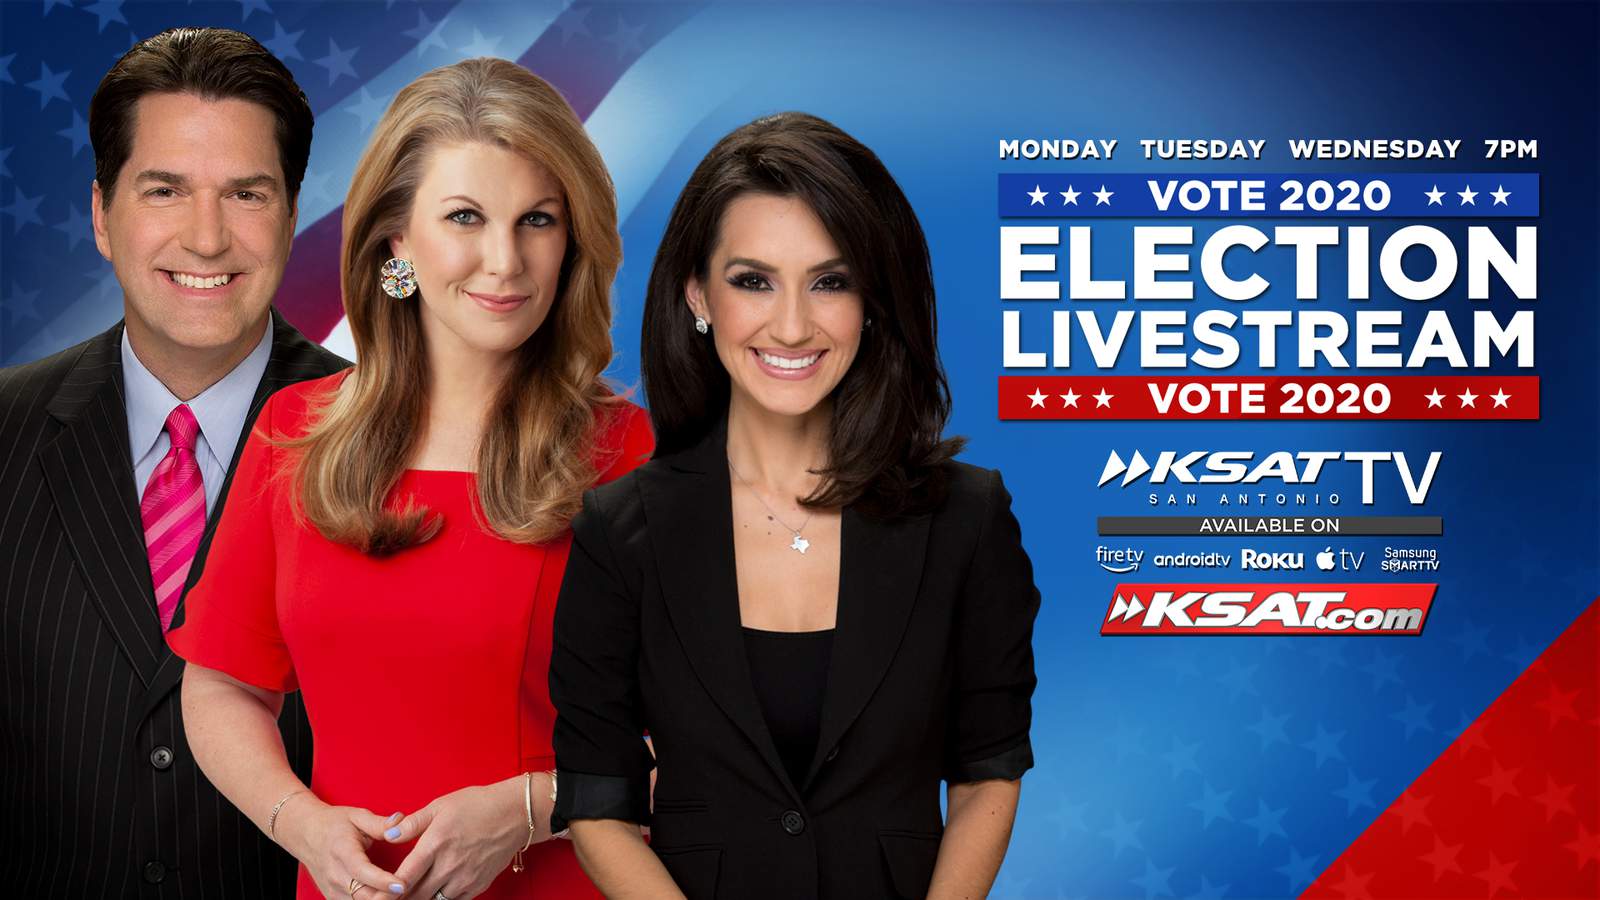 How to watch KSAT’s election livestream series